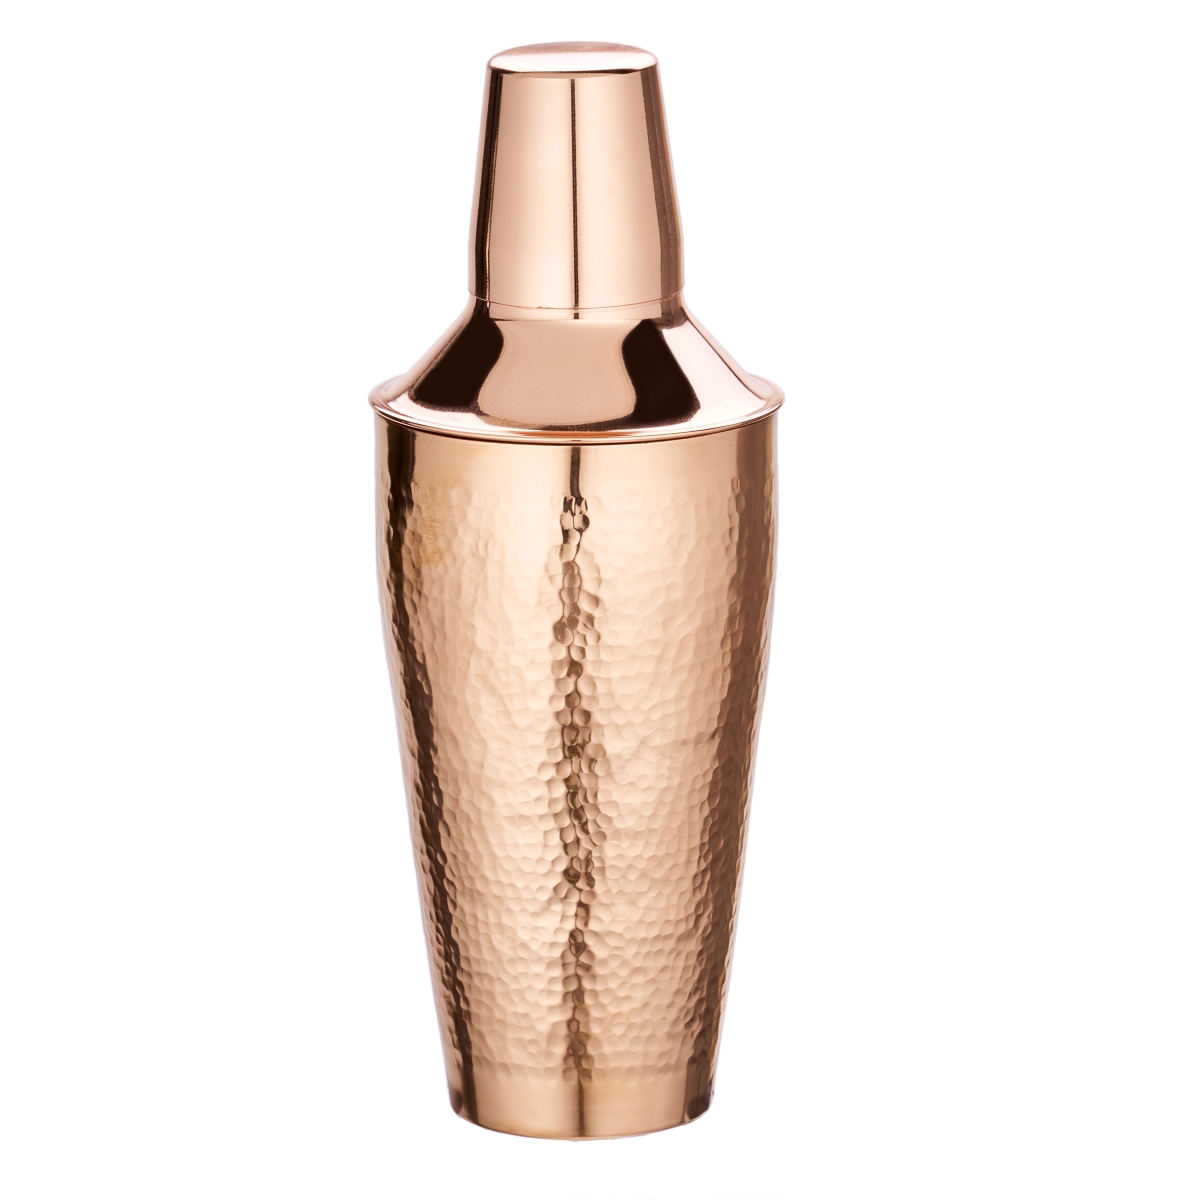 1521 4 X 4 X 9.87 In. Stone Hammered Cocktail Shaker, Solid Copper - 30 Oz